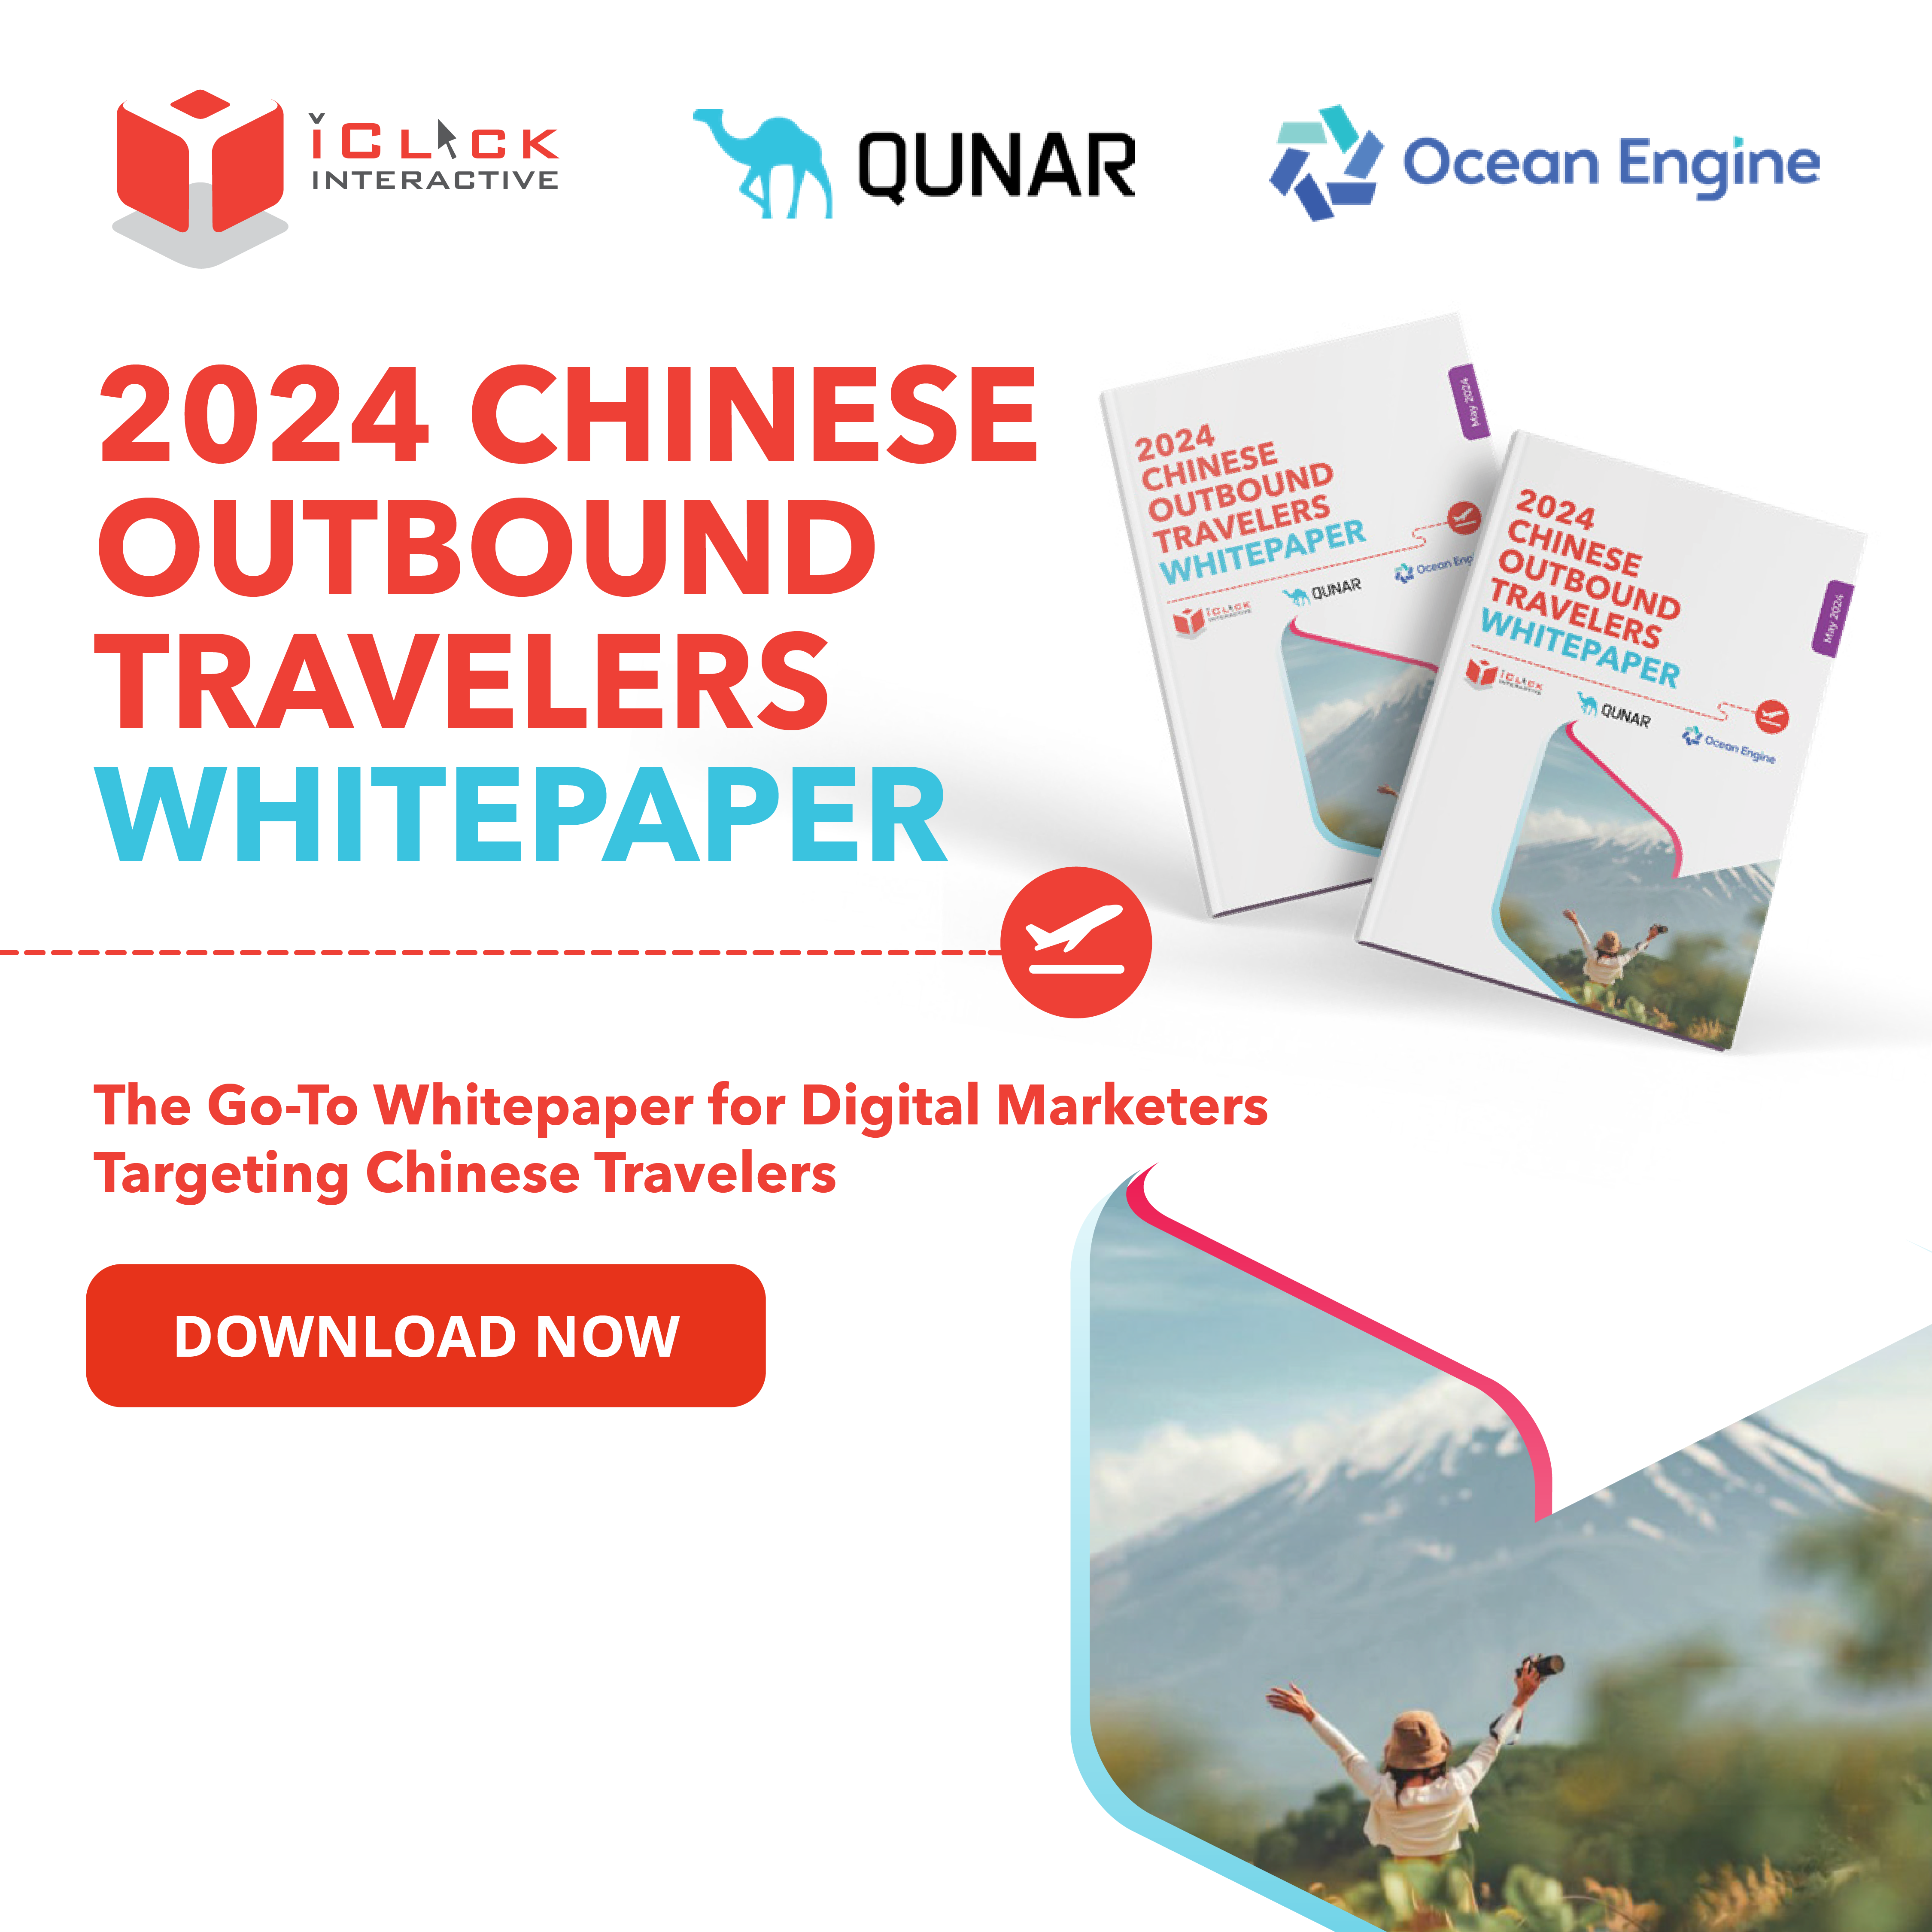 Exciting Release: iClick’s Chinese Outbound Travelers Whitepaper 2024